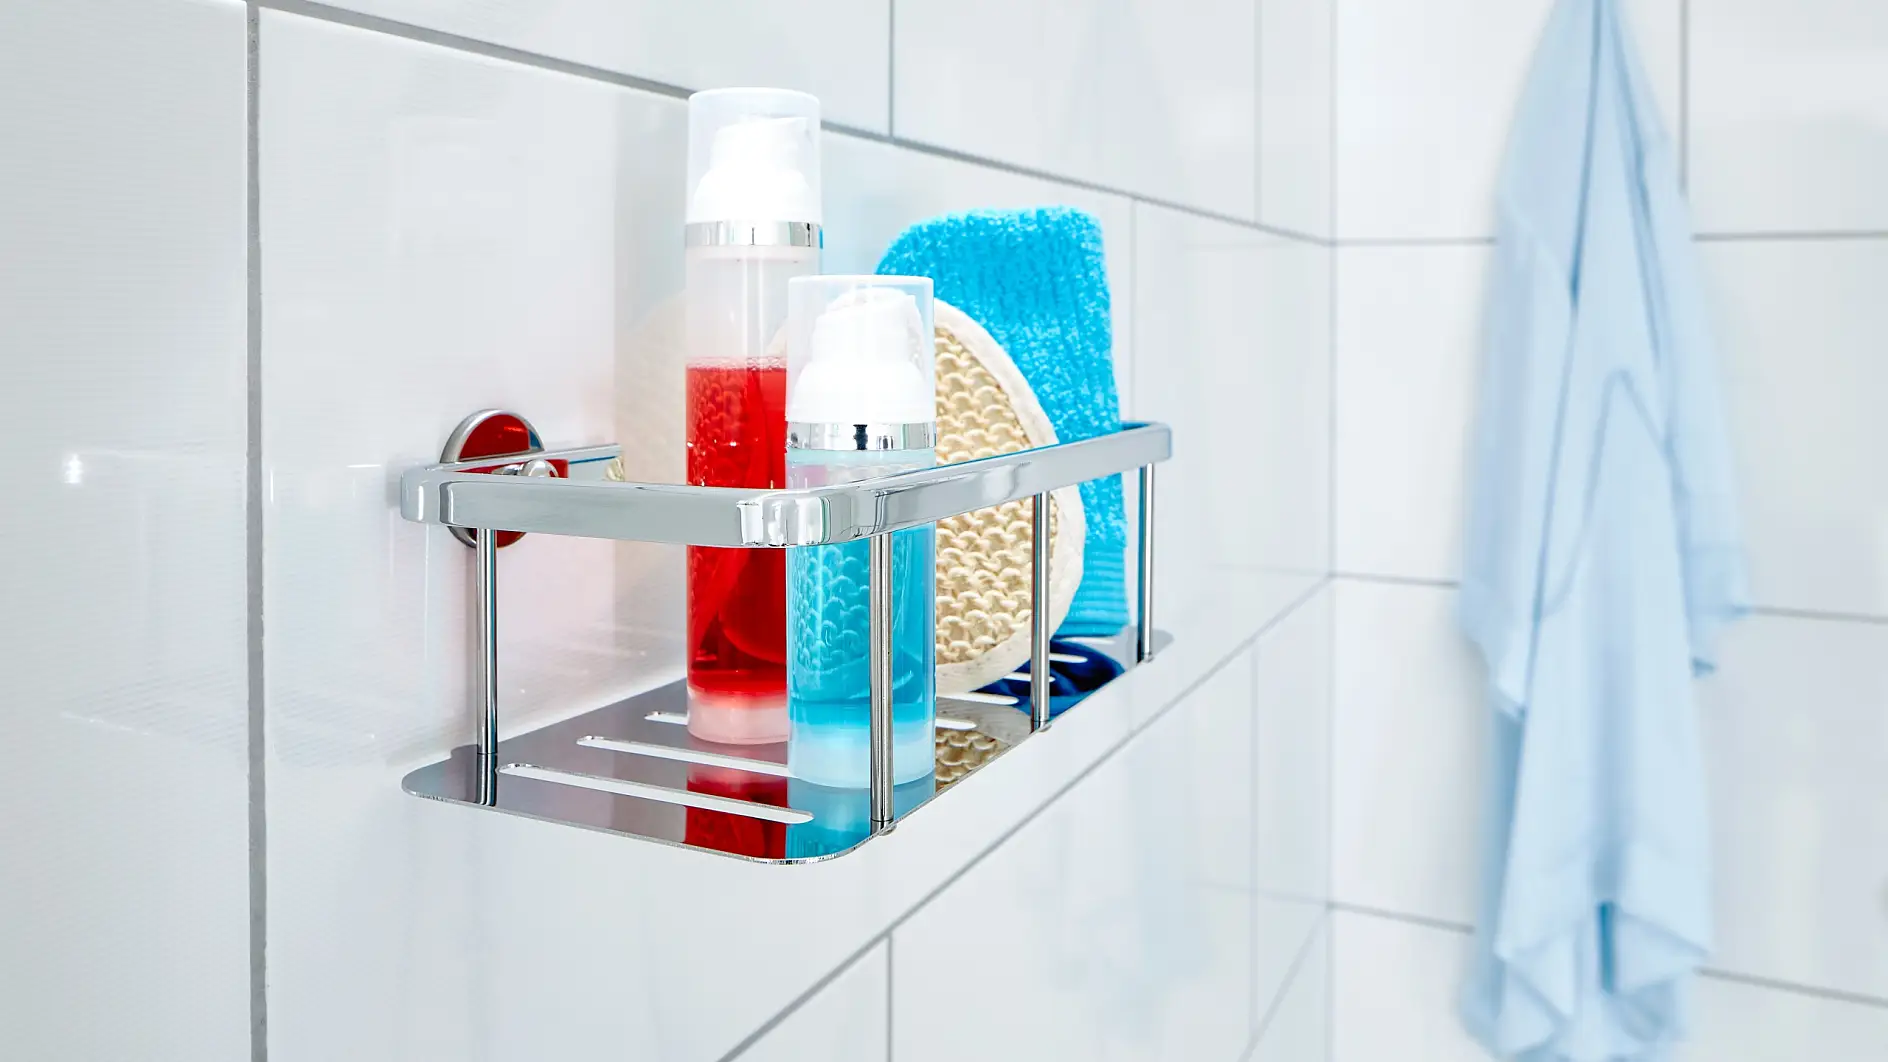 Keep your daily shower supplies ready at hand, within arm’s reach but out of reach for water drops.